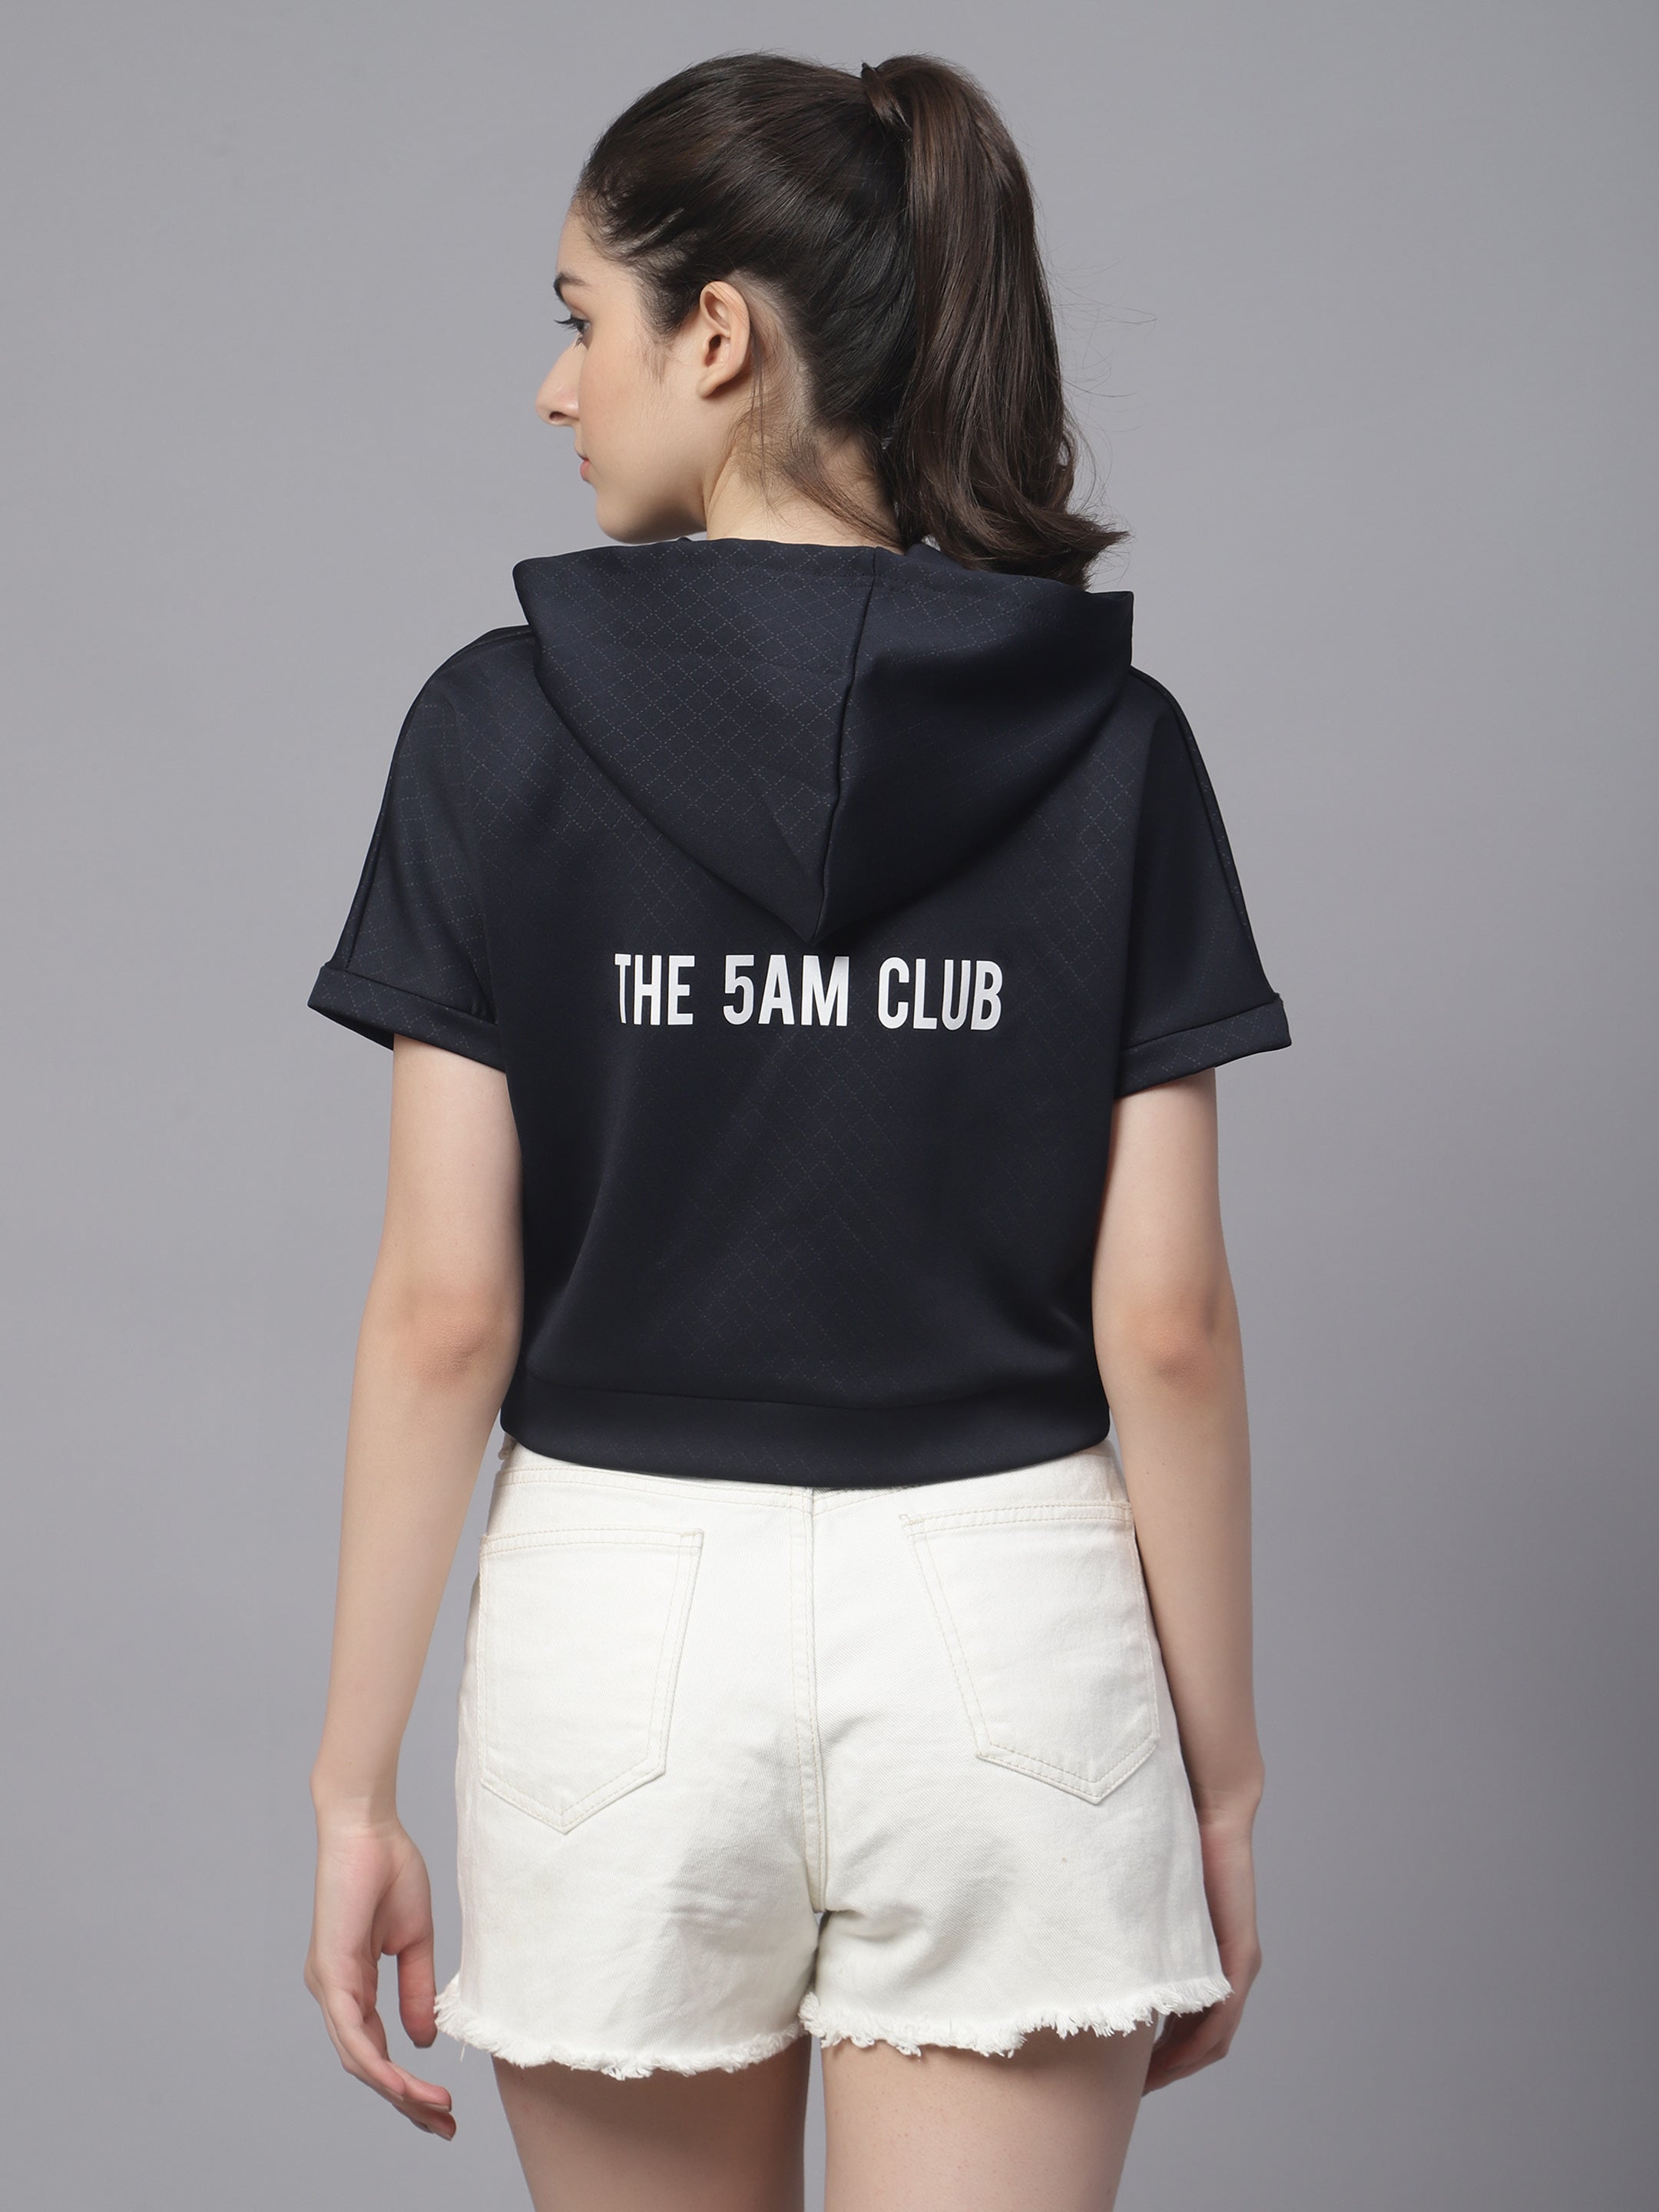 The 5am Club Fitness Hoodie